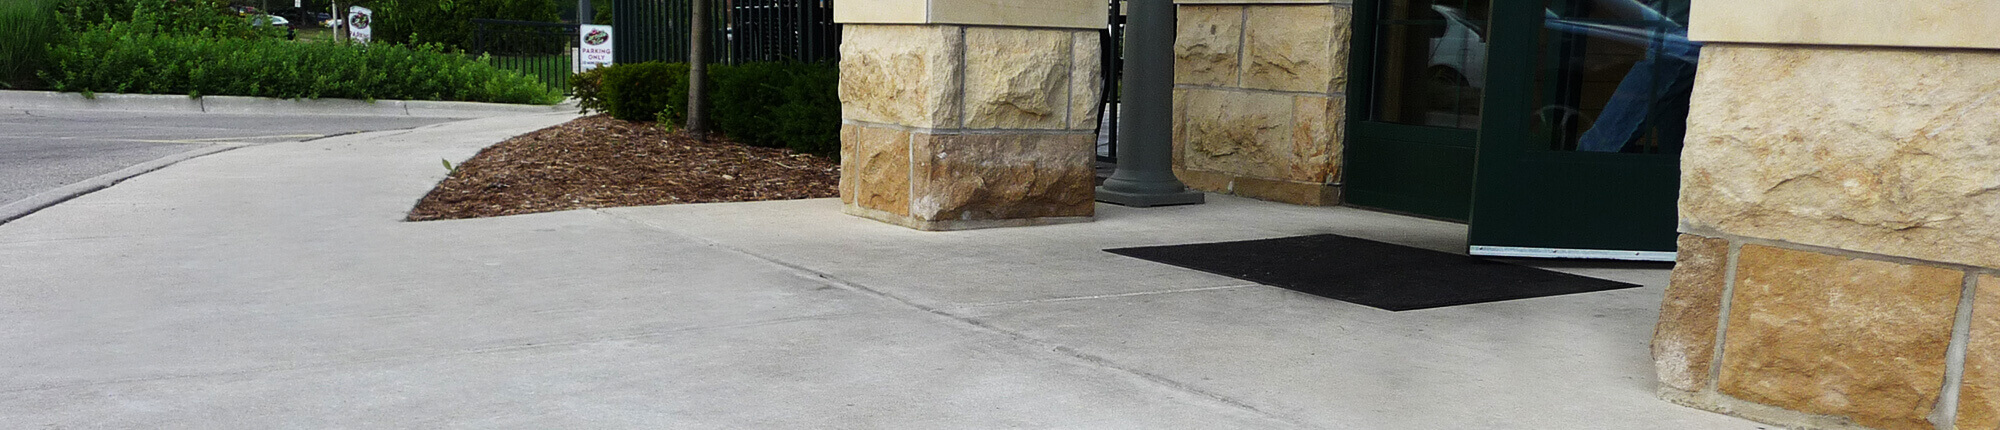 Fresh concrete installation in front of office building.